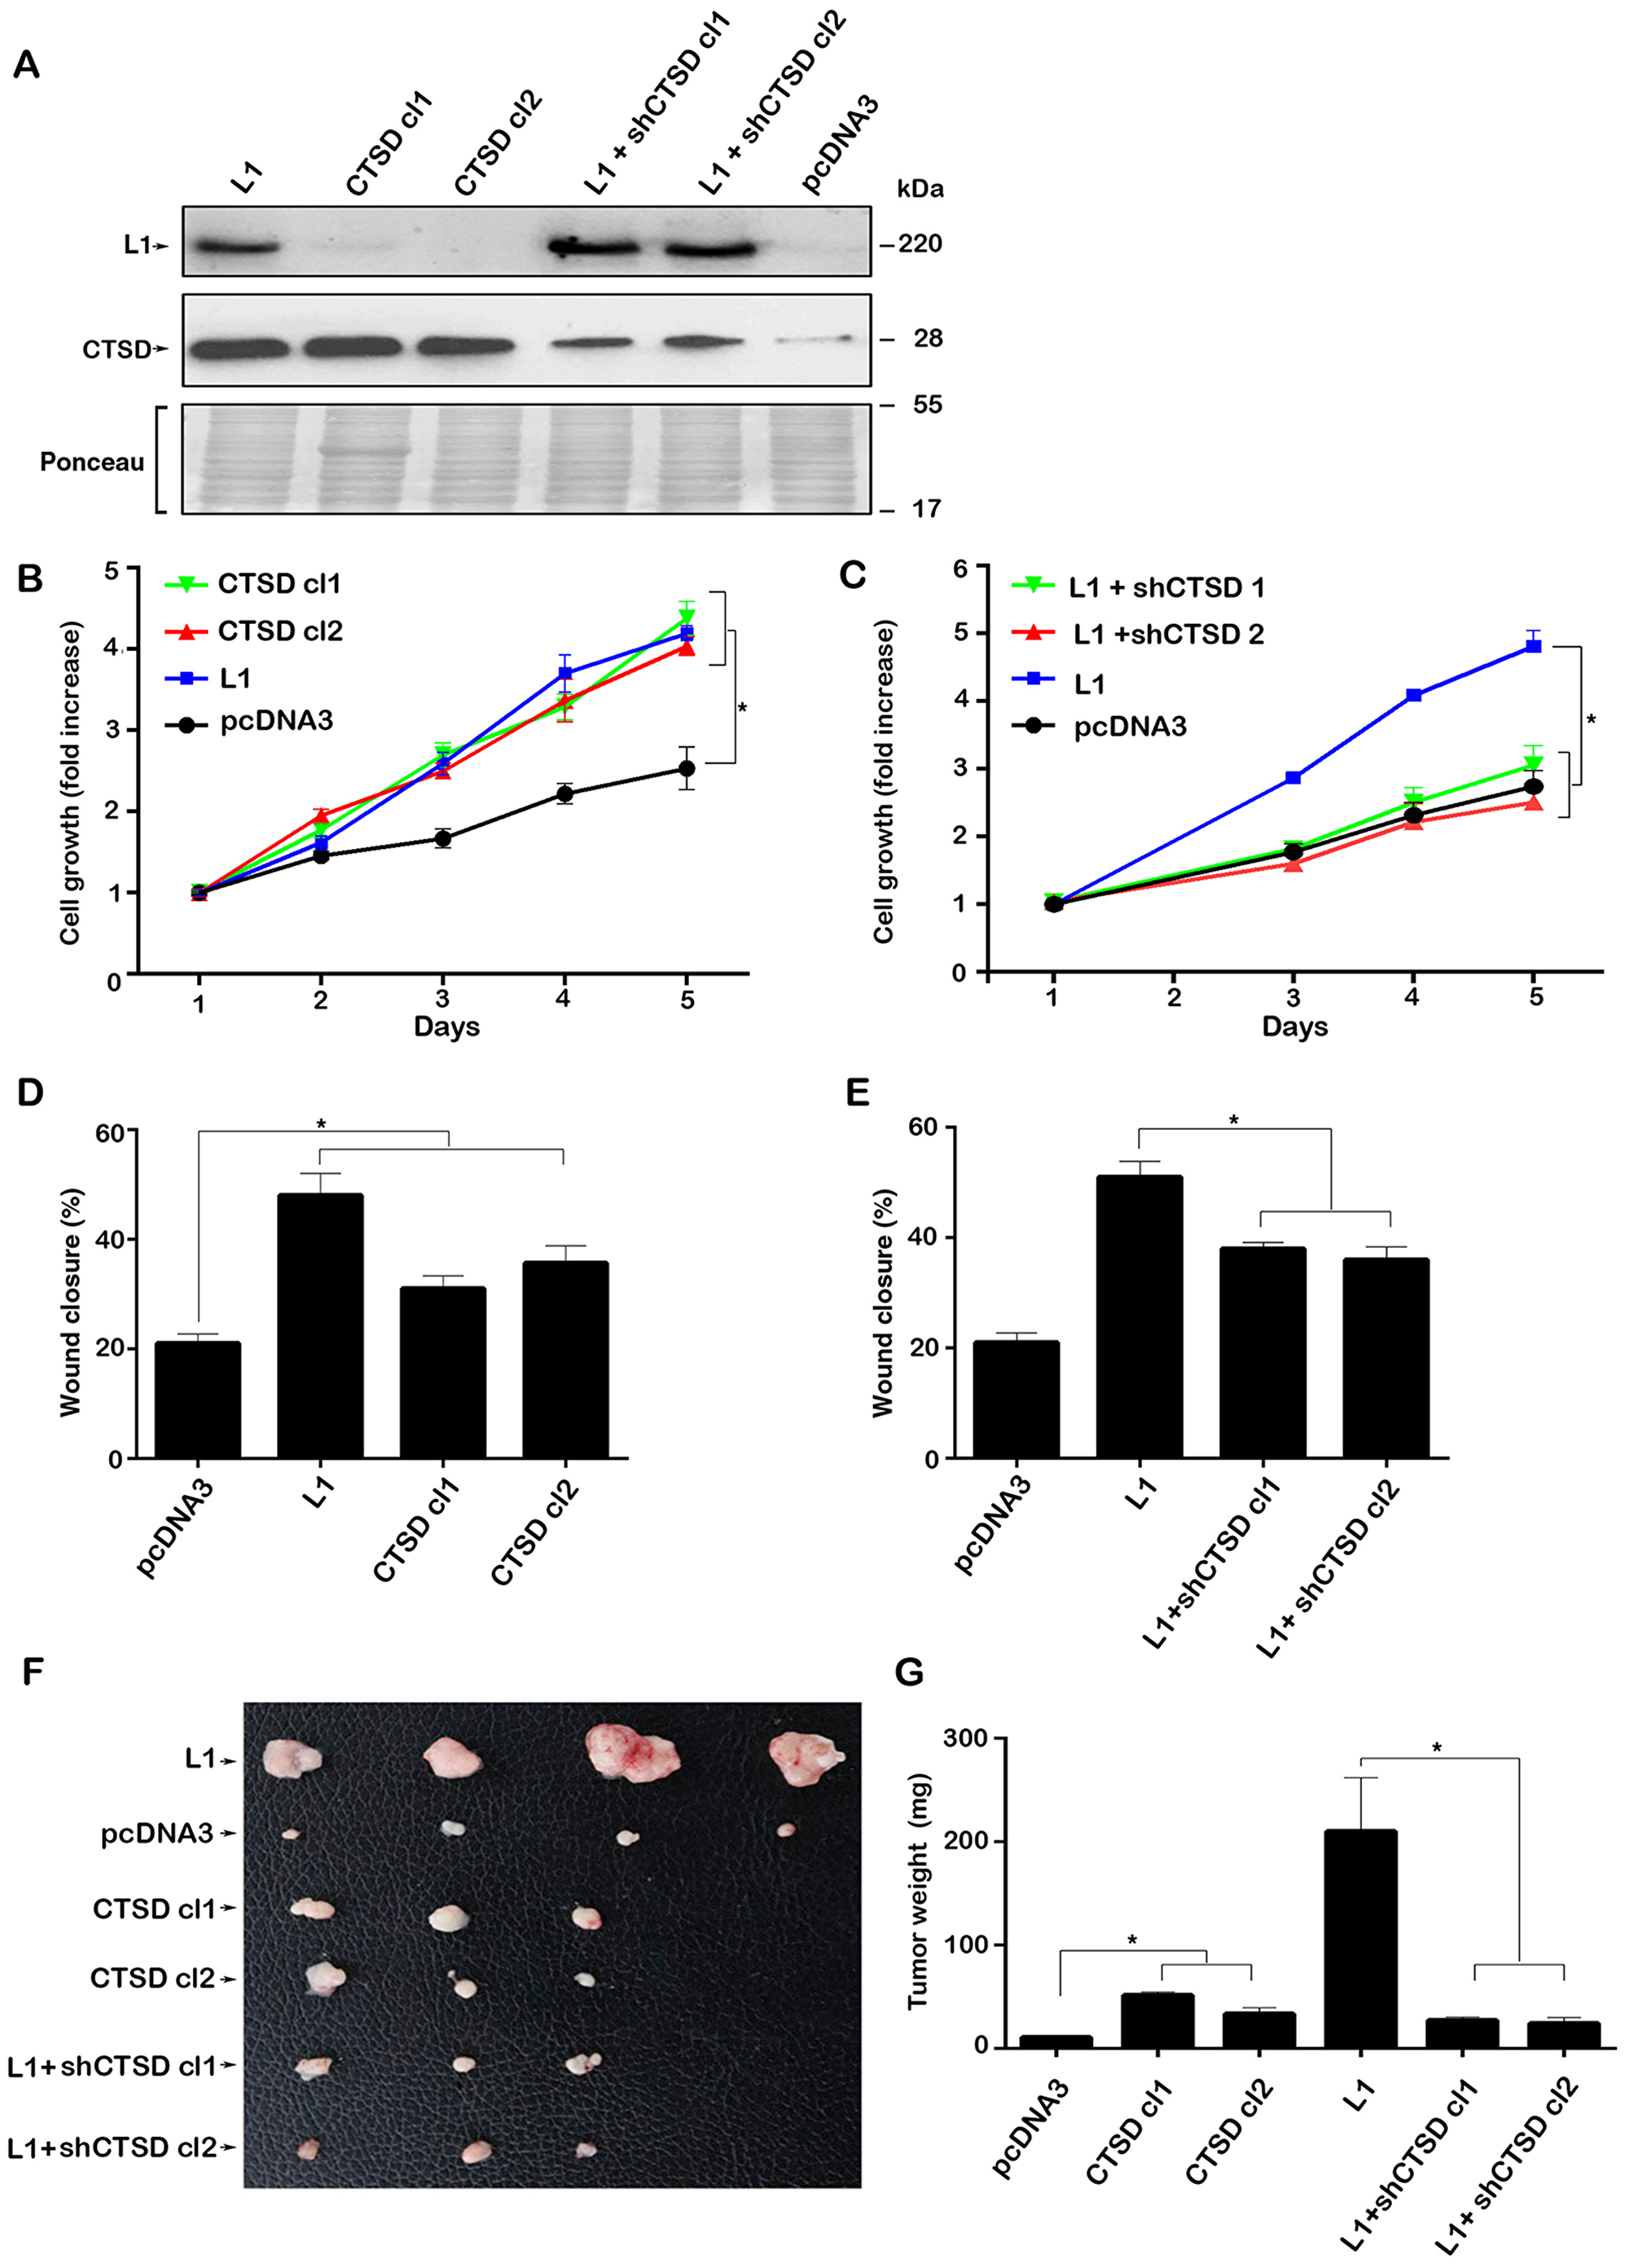 Modulating the expression of CTSD in CRC cells affects cell growth, motility and tumorigenesis.